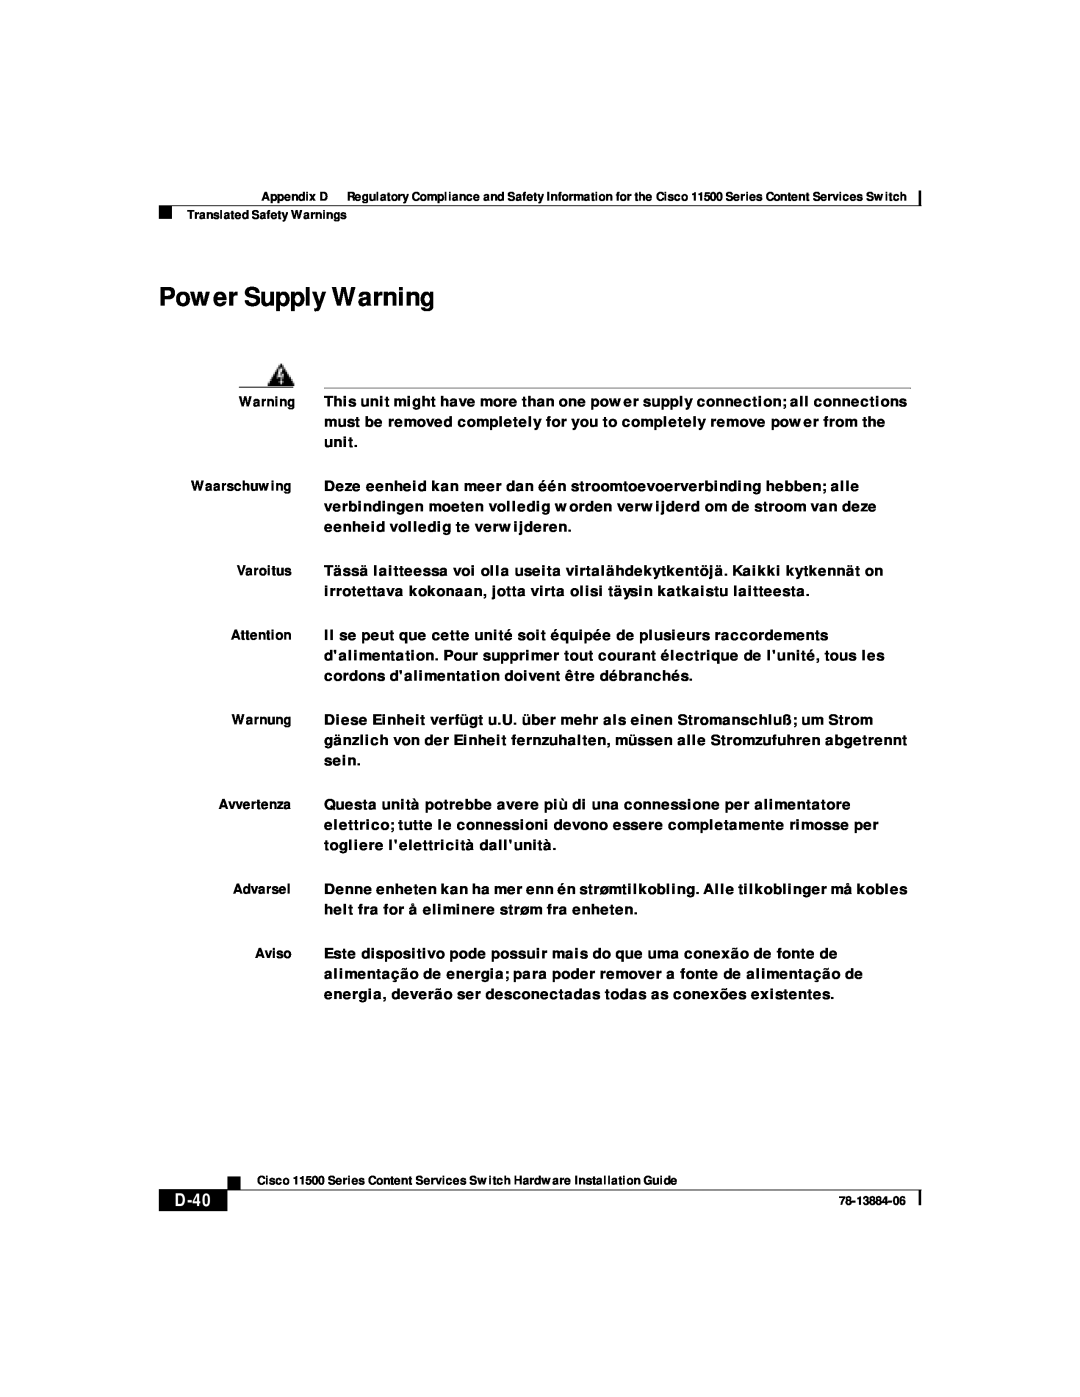 Cisco Systems 11500 Series manual Power Supply Warning, D-40 